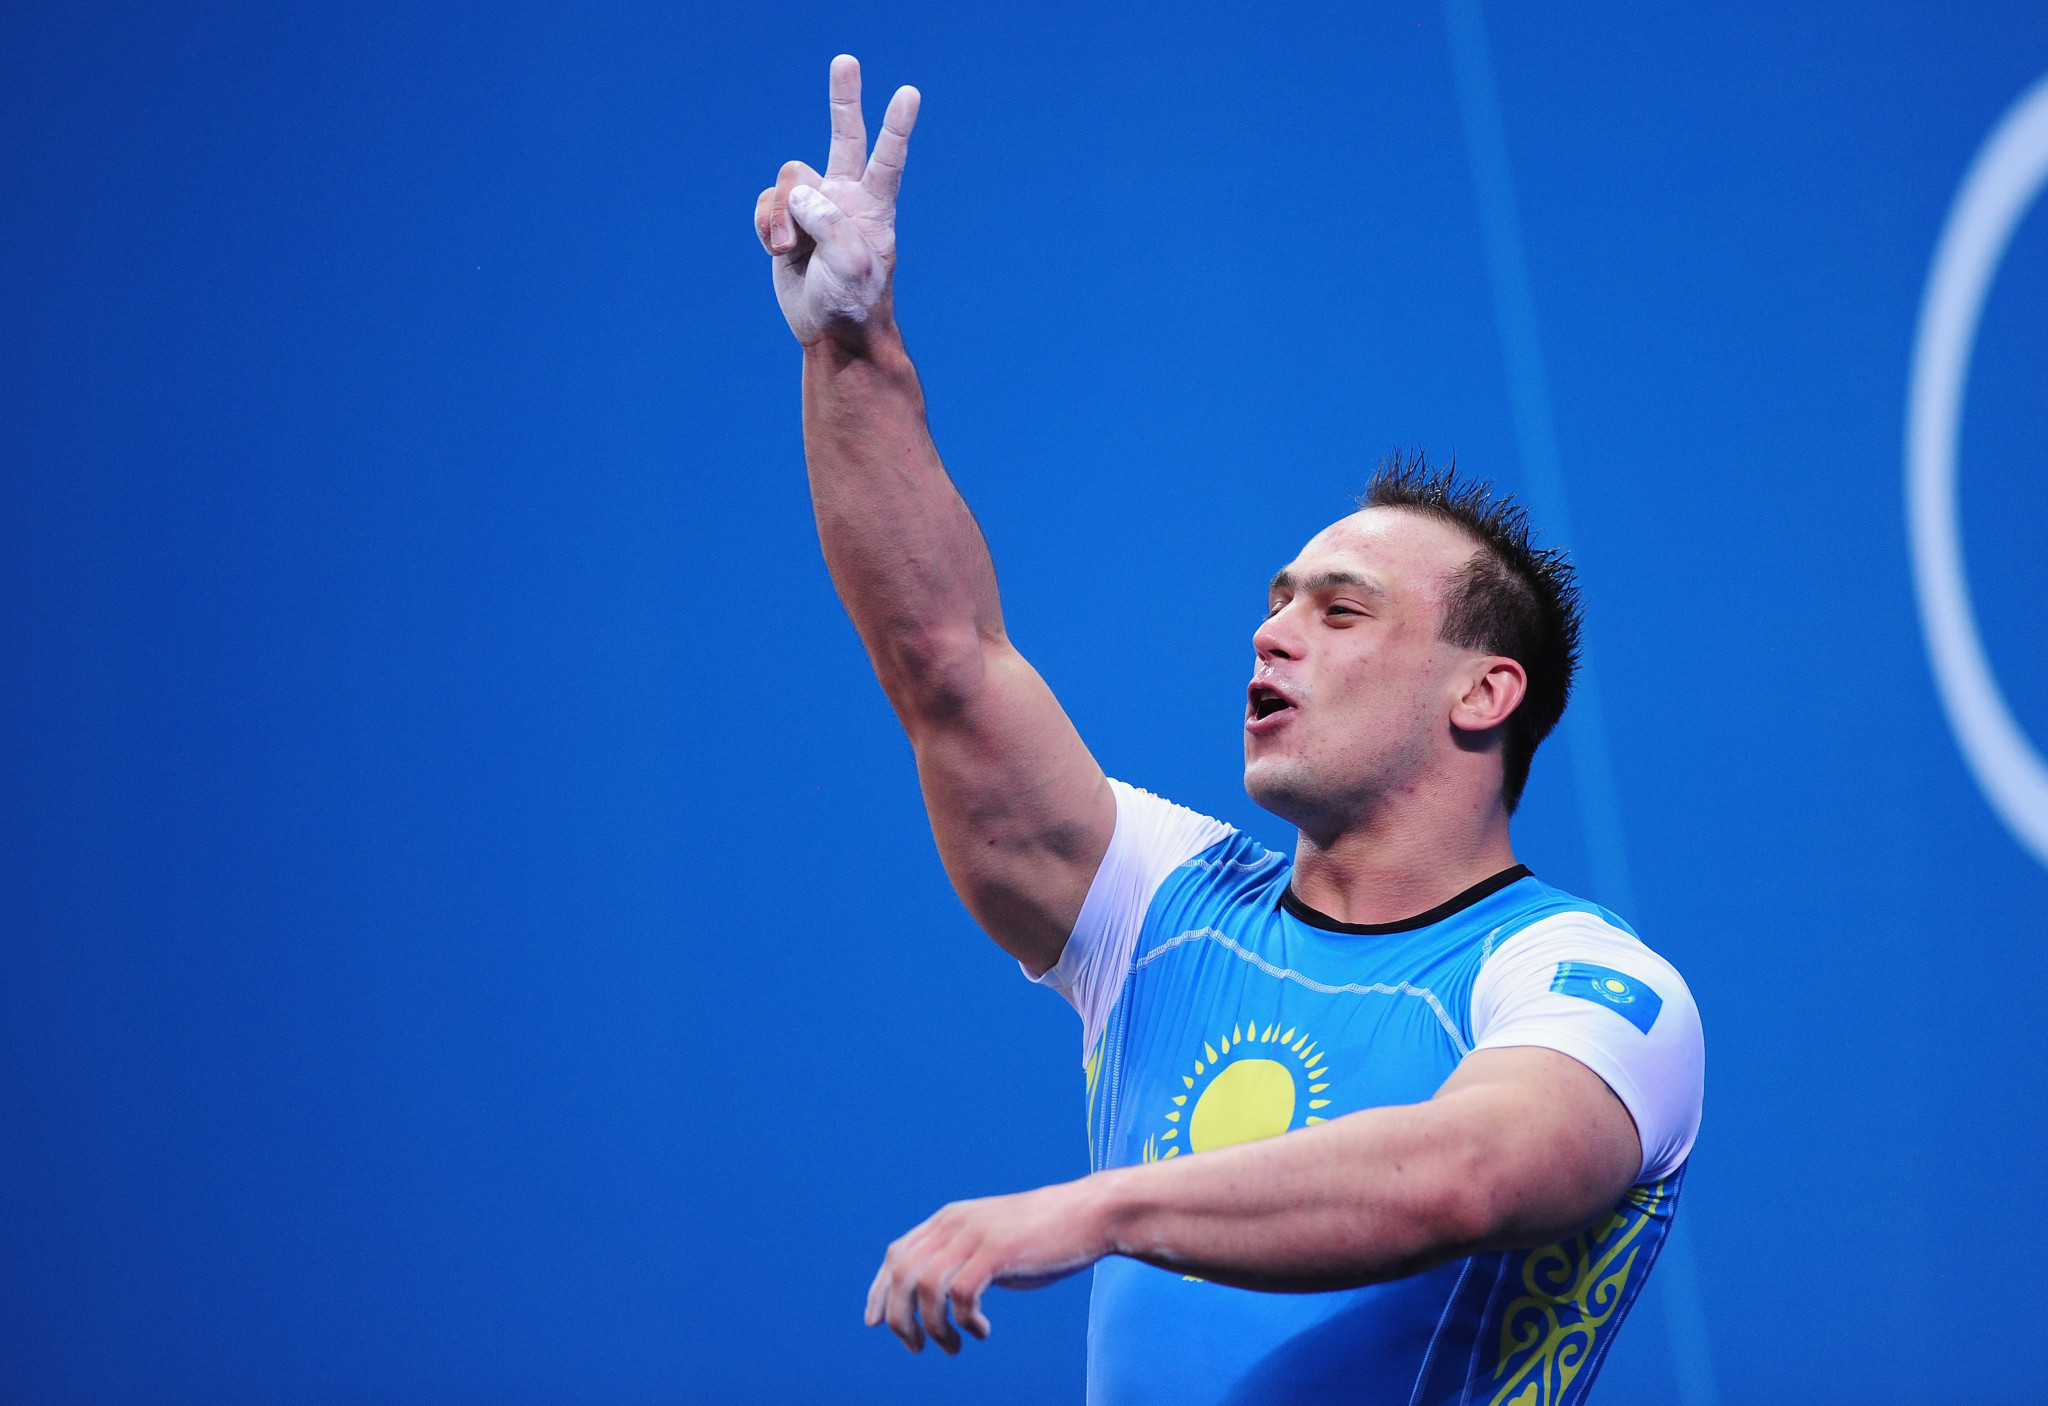 Ilya Ilyin, stripped of two Olympic gold medals, will be in Ashgabat ©Getty Images